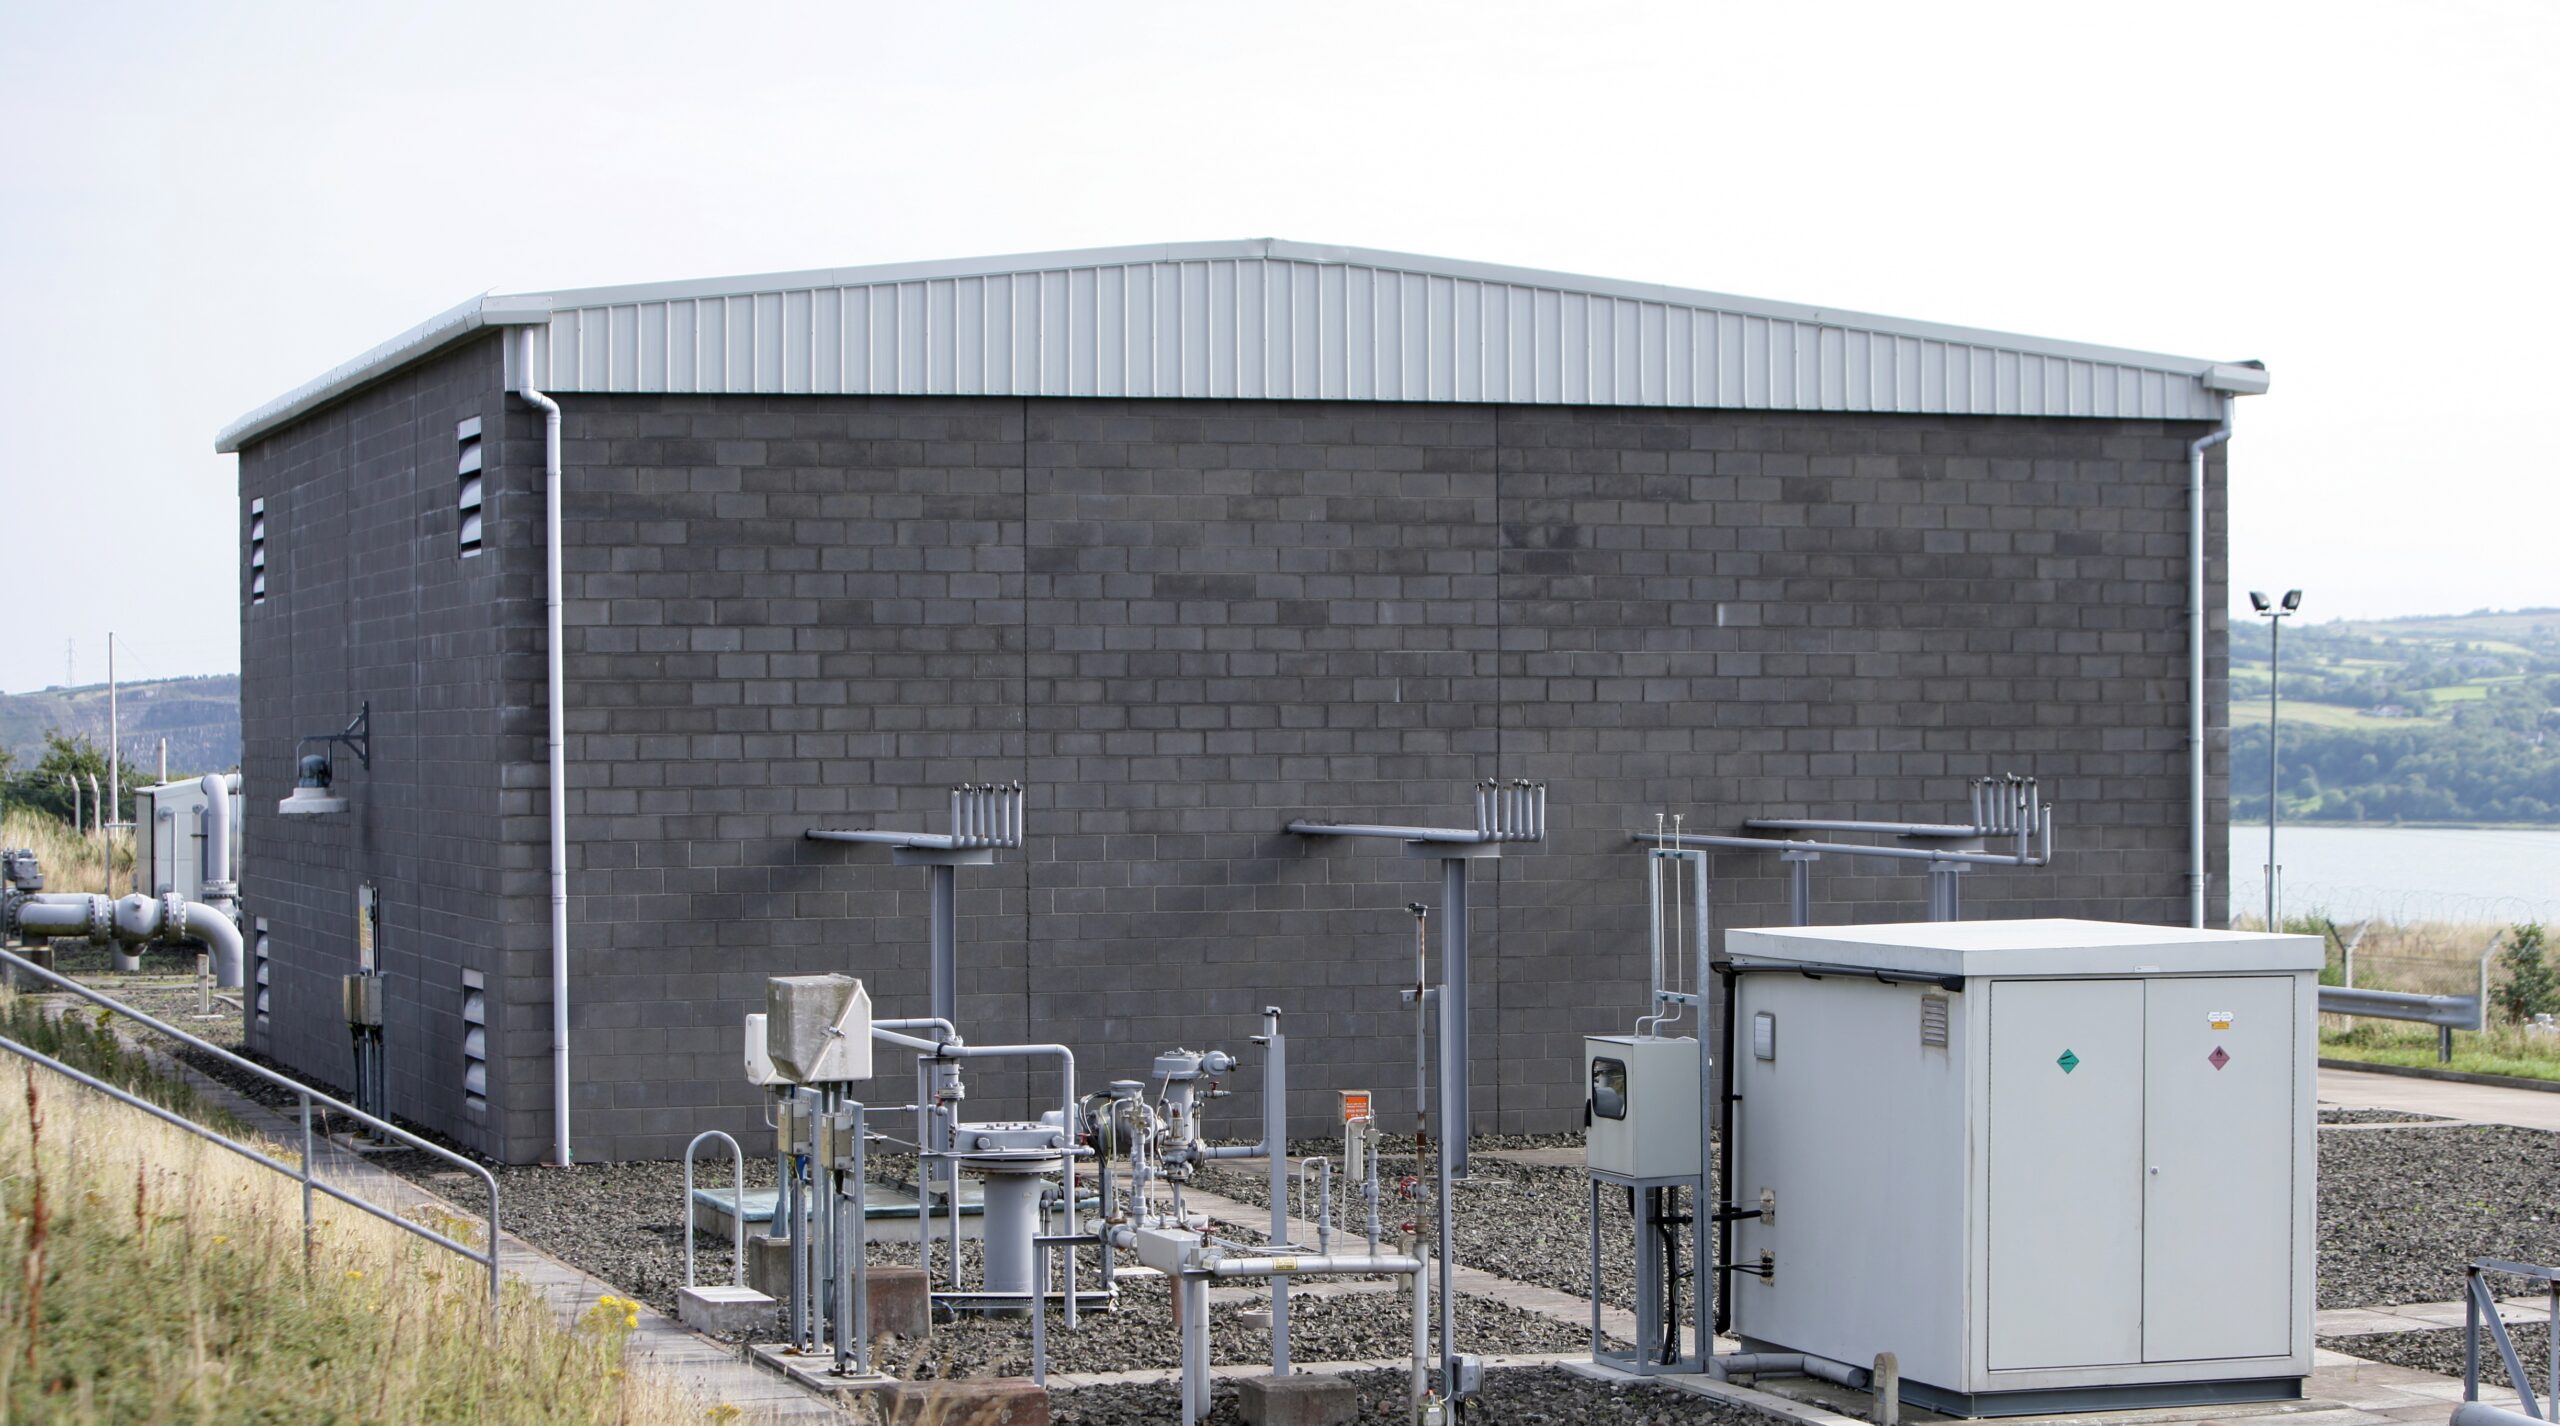 MEMBER NEWS: Ballylumford Power-to-X Project to accelerate the commercialisation of first-of-a-kind longer duration energy storage